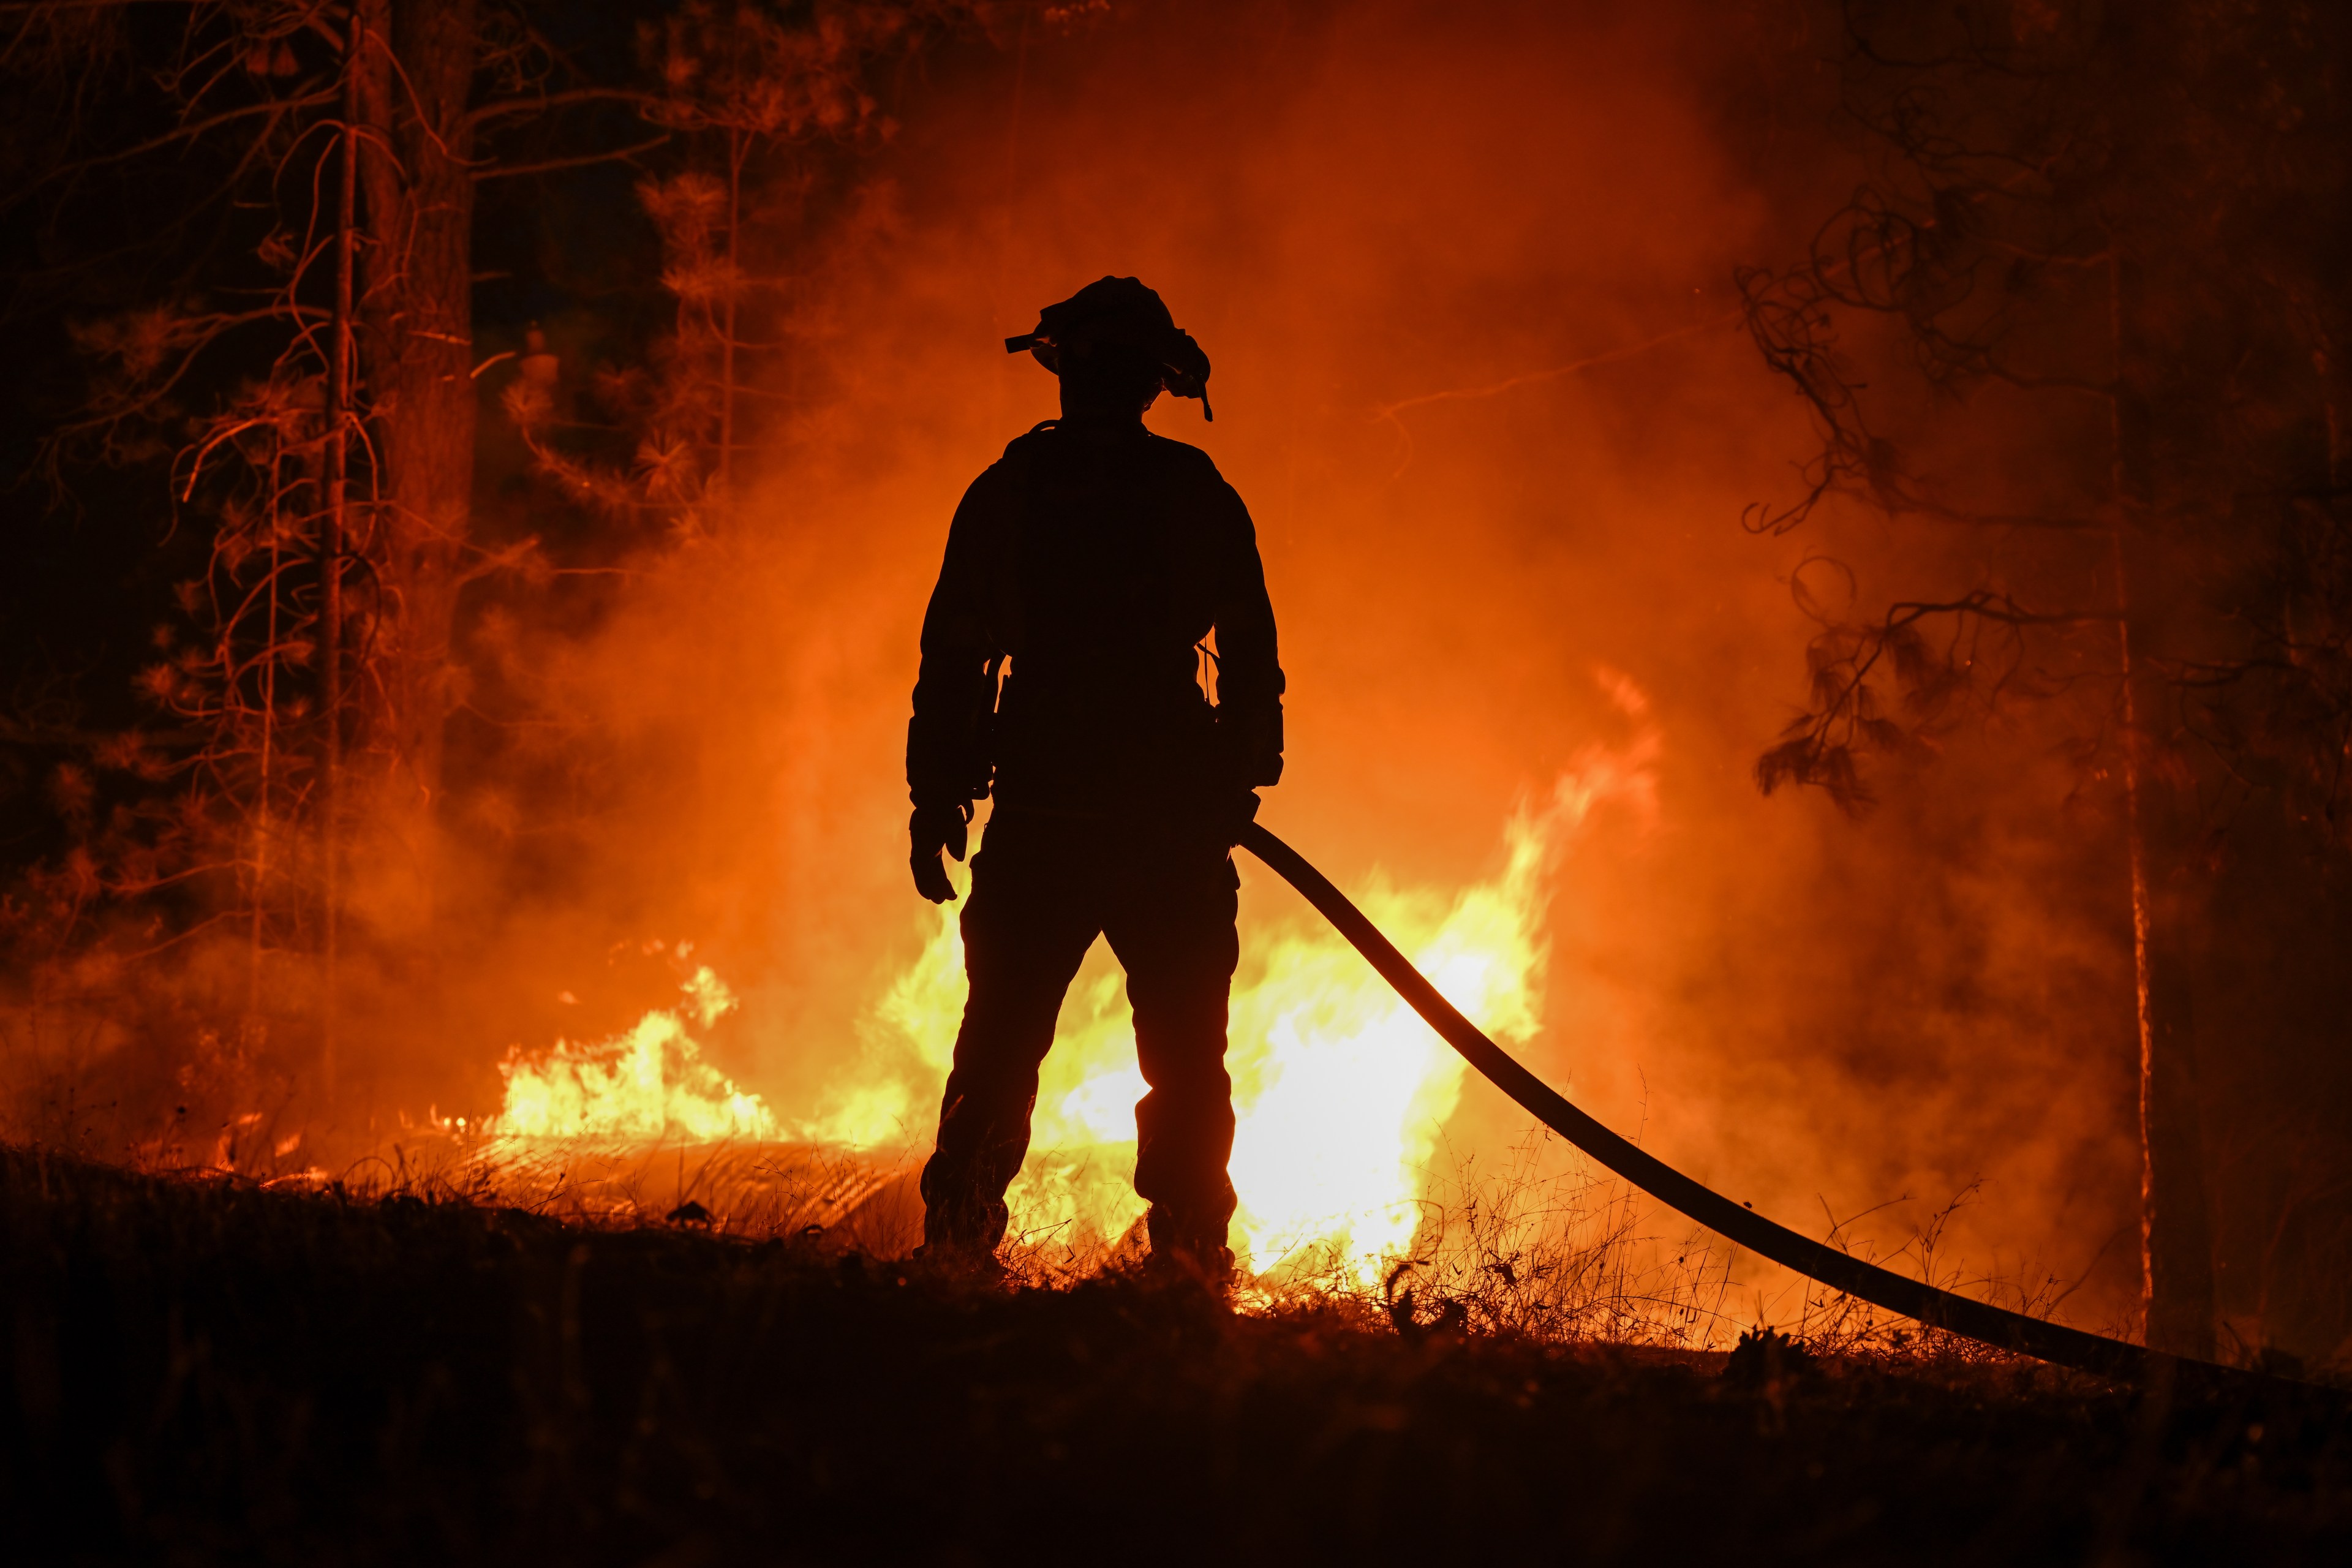 A firefighter stands in silhouette against a raging forest fire, holding a hose, with flames and smoke illuminating the night around them.